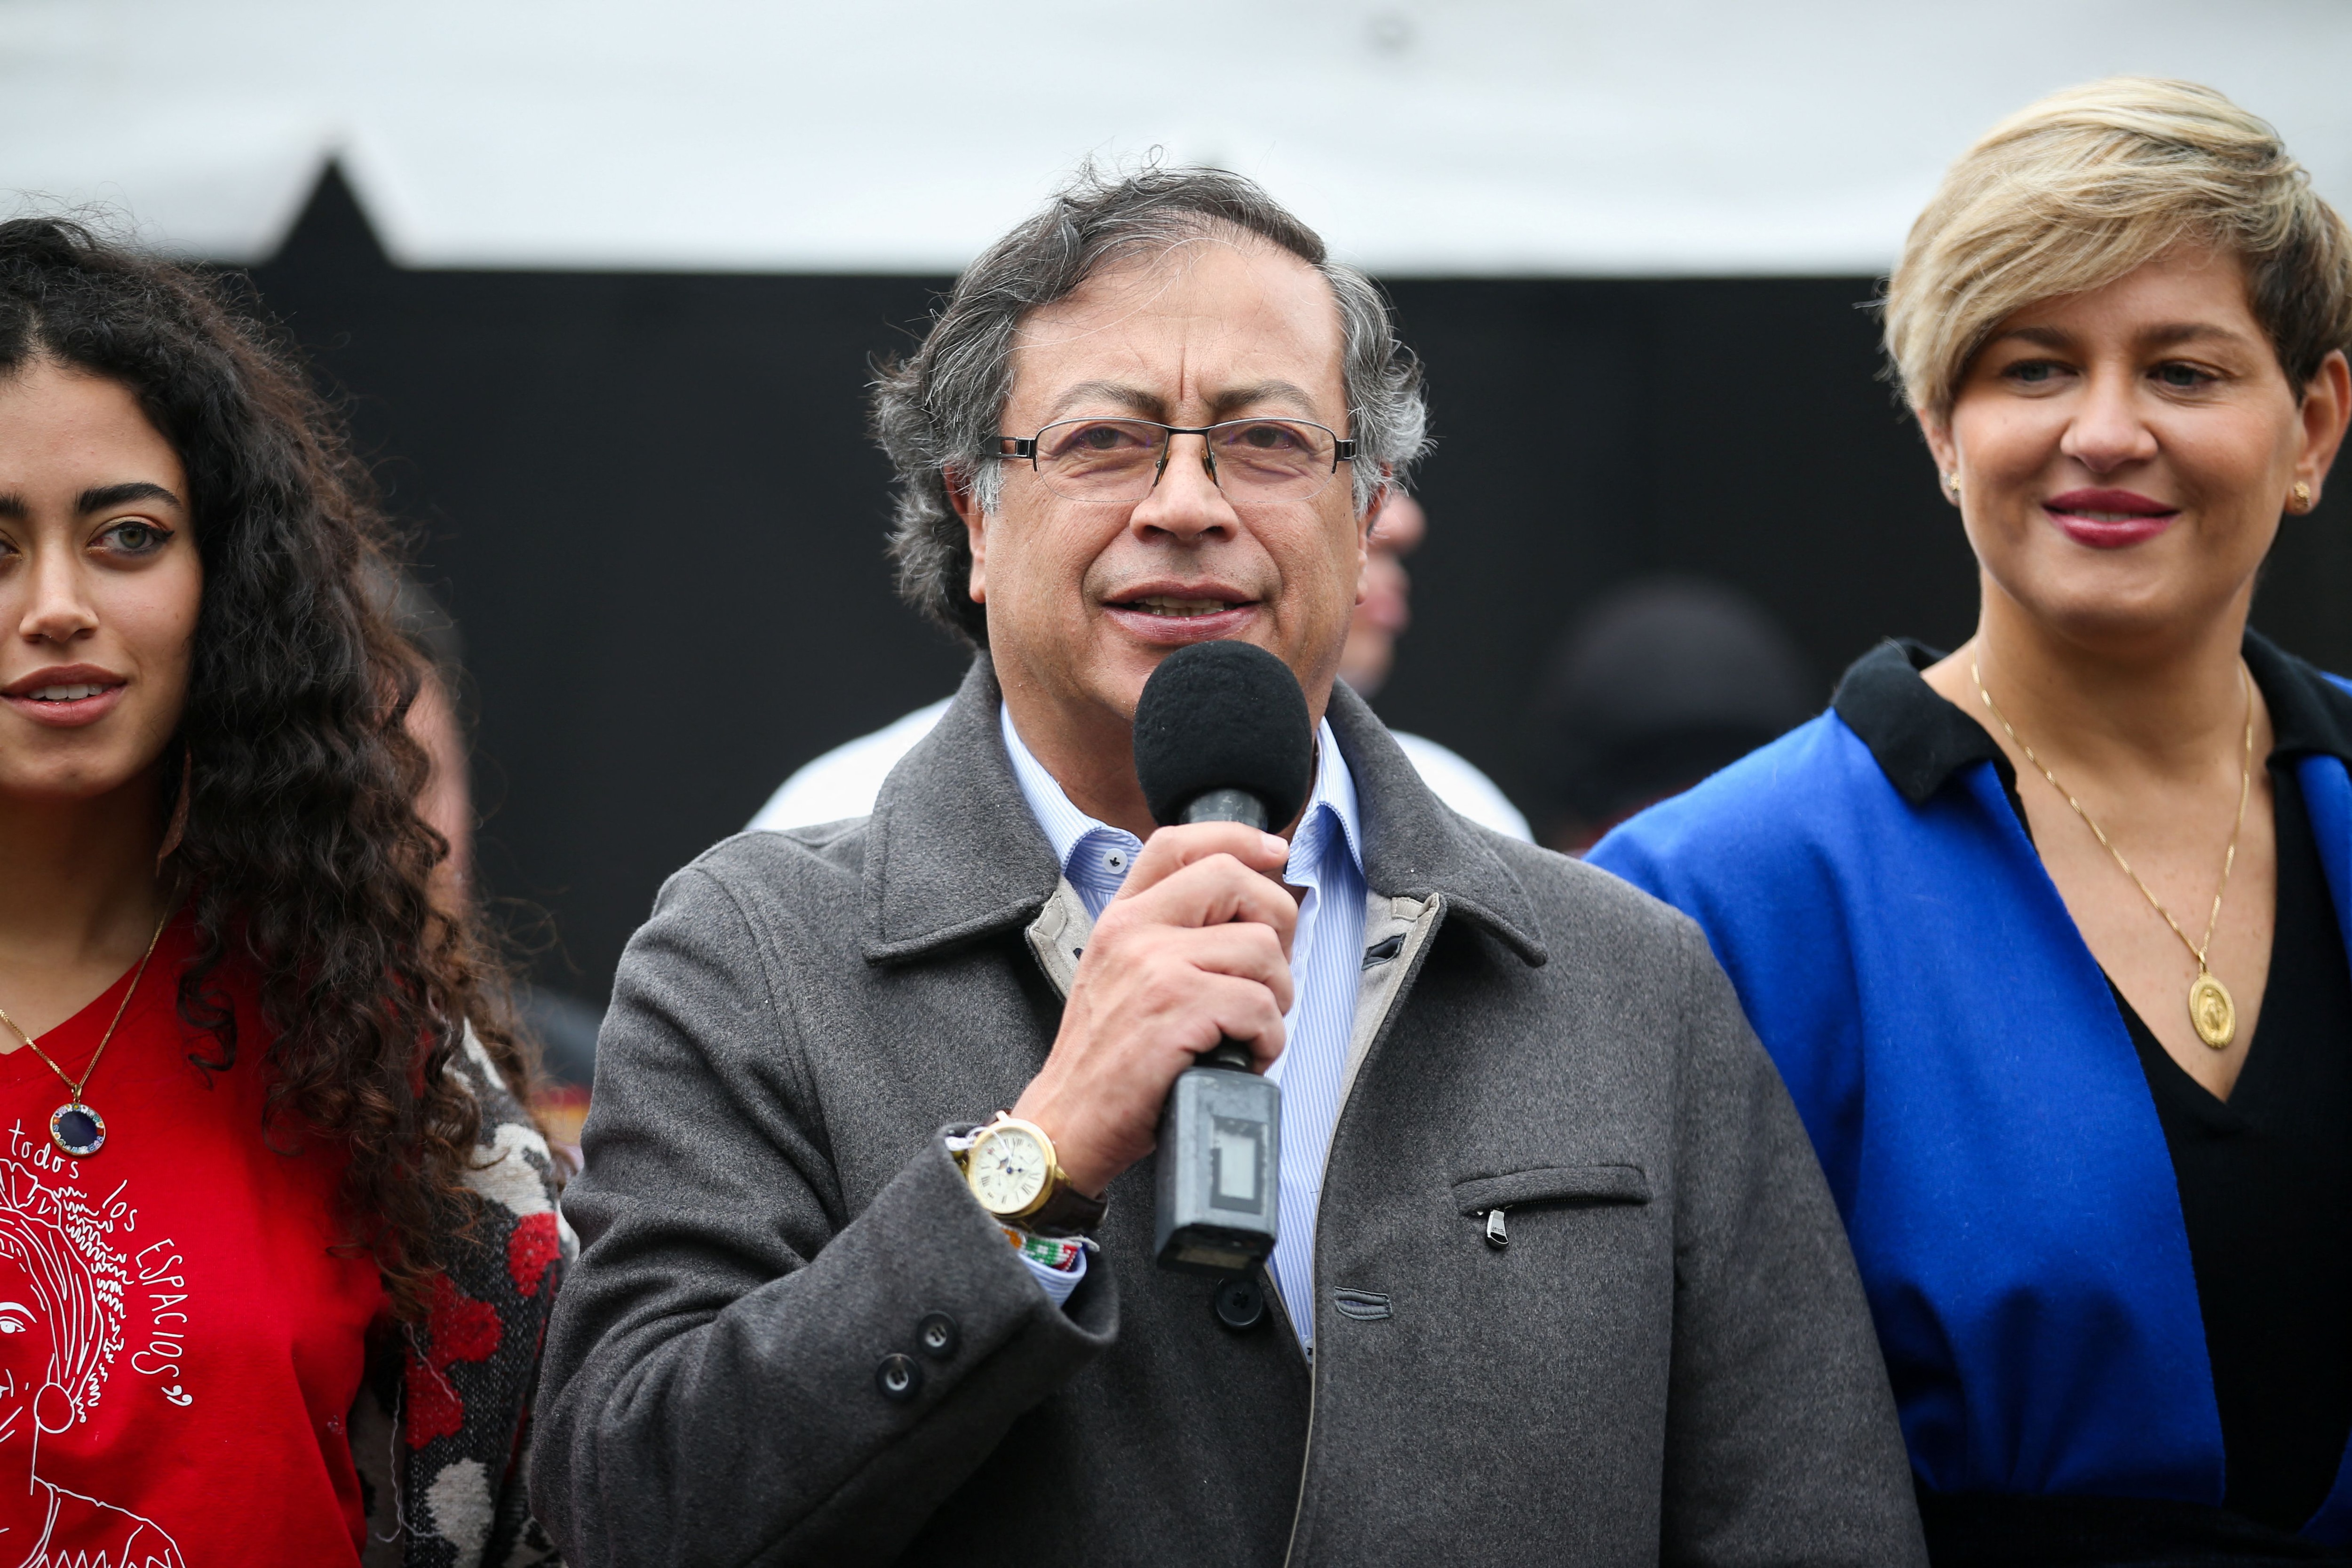 Colombian left-wing presidential candidate Gustavo Petro of the Historic Pact coalition speaks after casting his vote at a polling station, next to his wife Veronica Alcocer and daughter during the second round of the presidential election in Bogota, Colombia June 19, 2022. REUTERS/Luisa Gonzalez